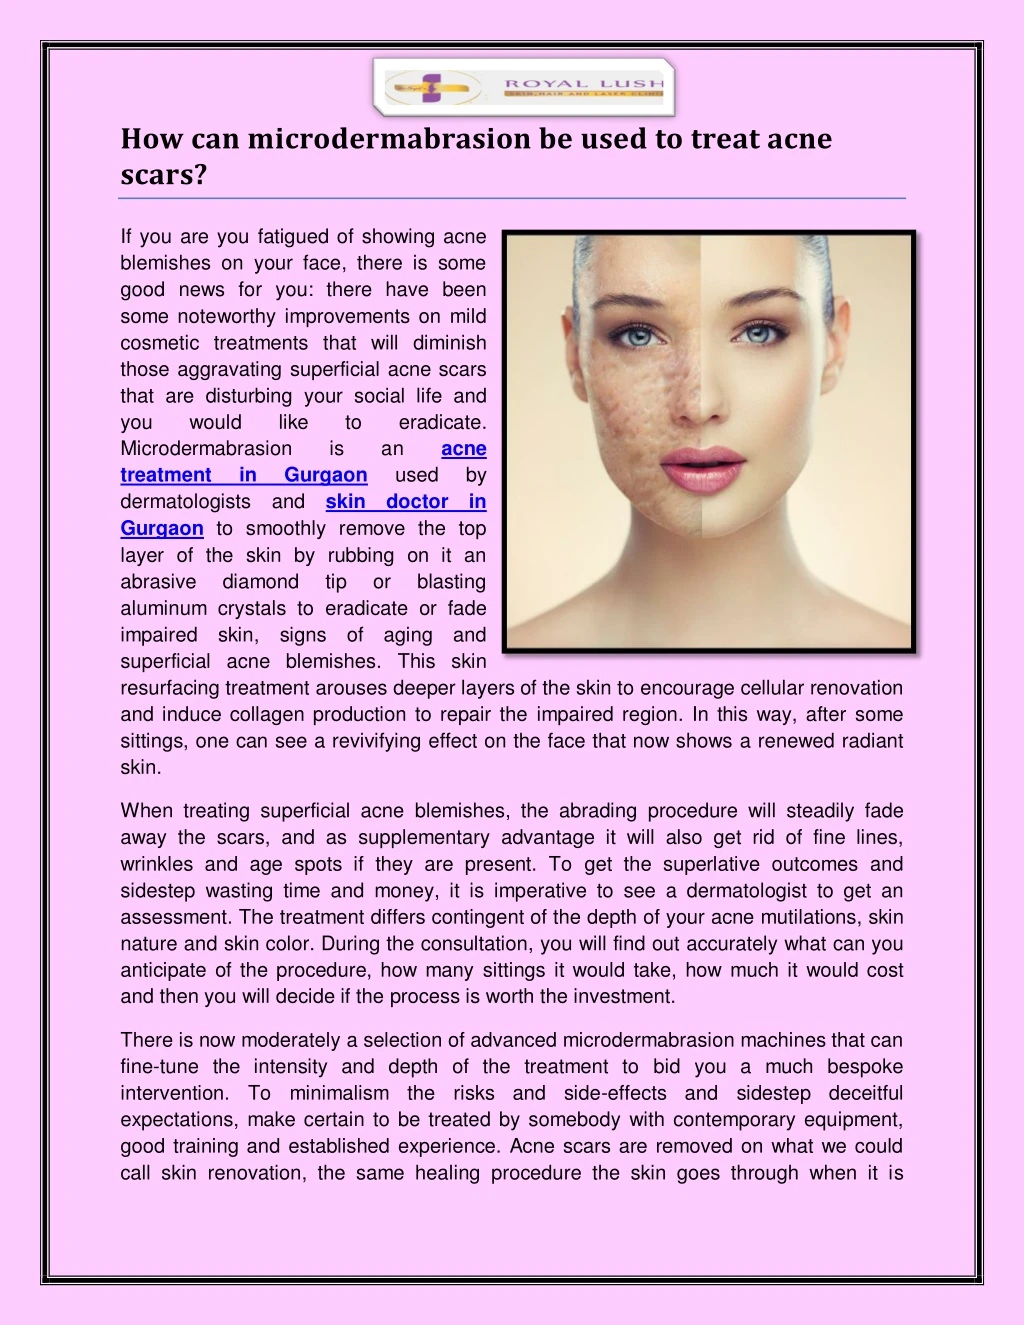 how can microdermabrasion be used to treat acne